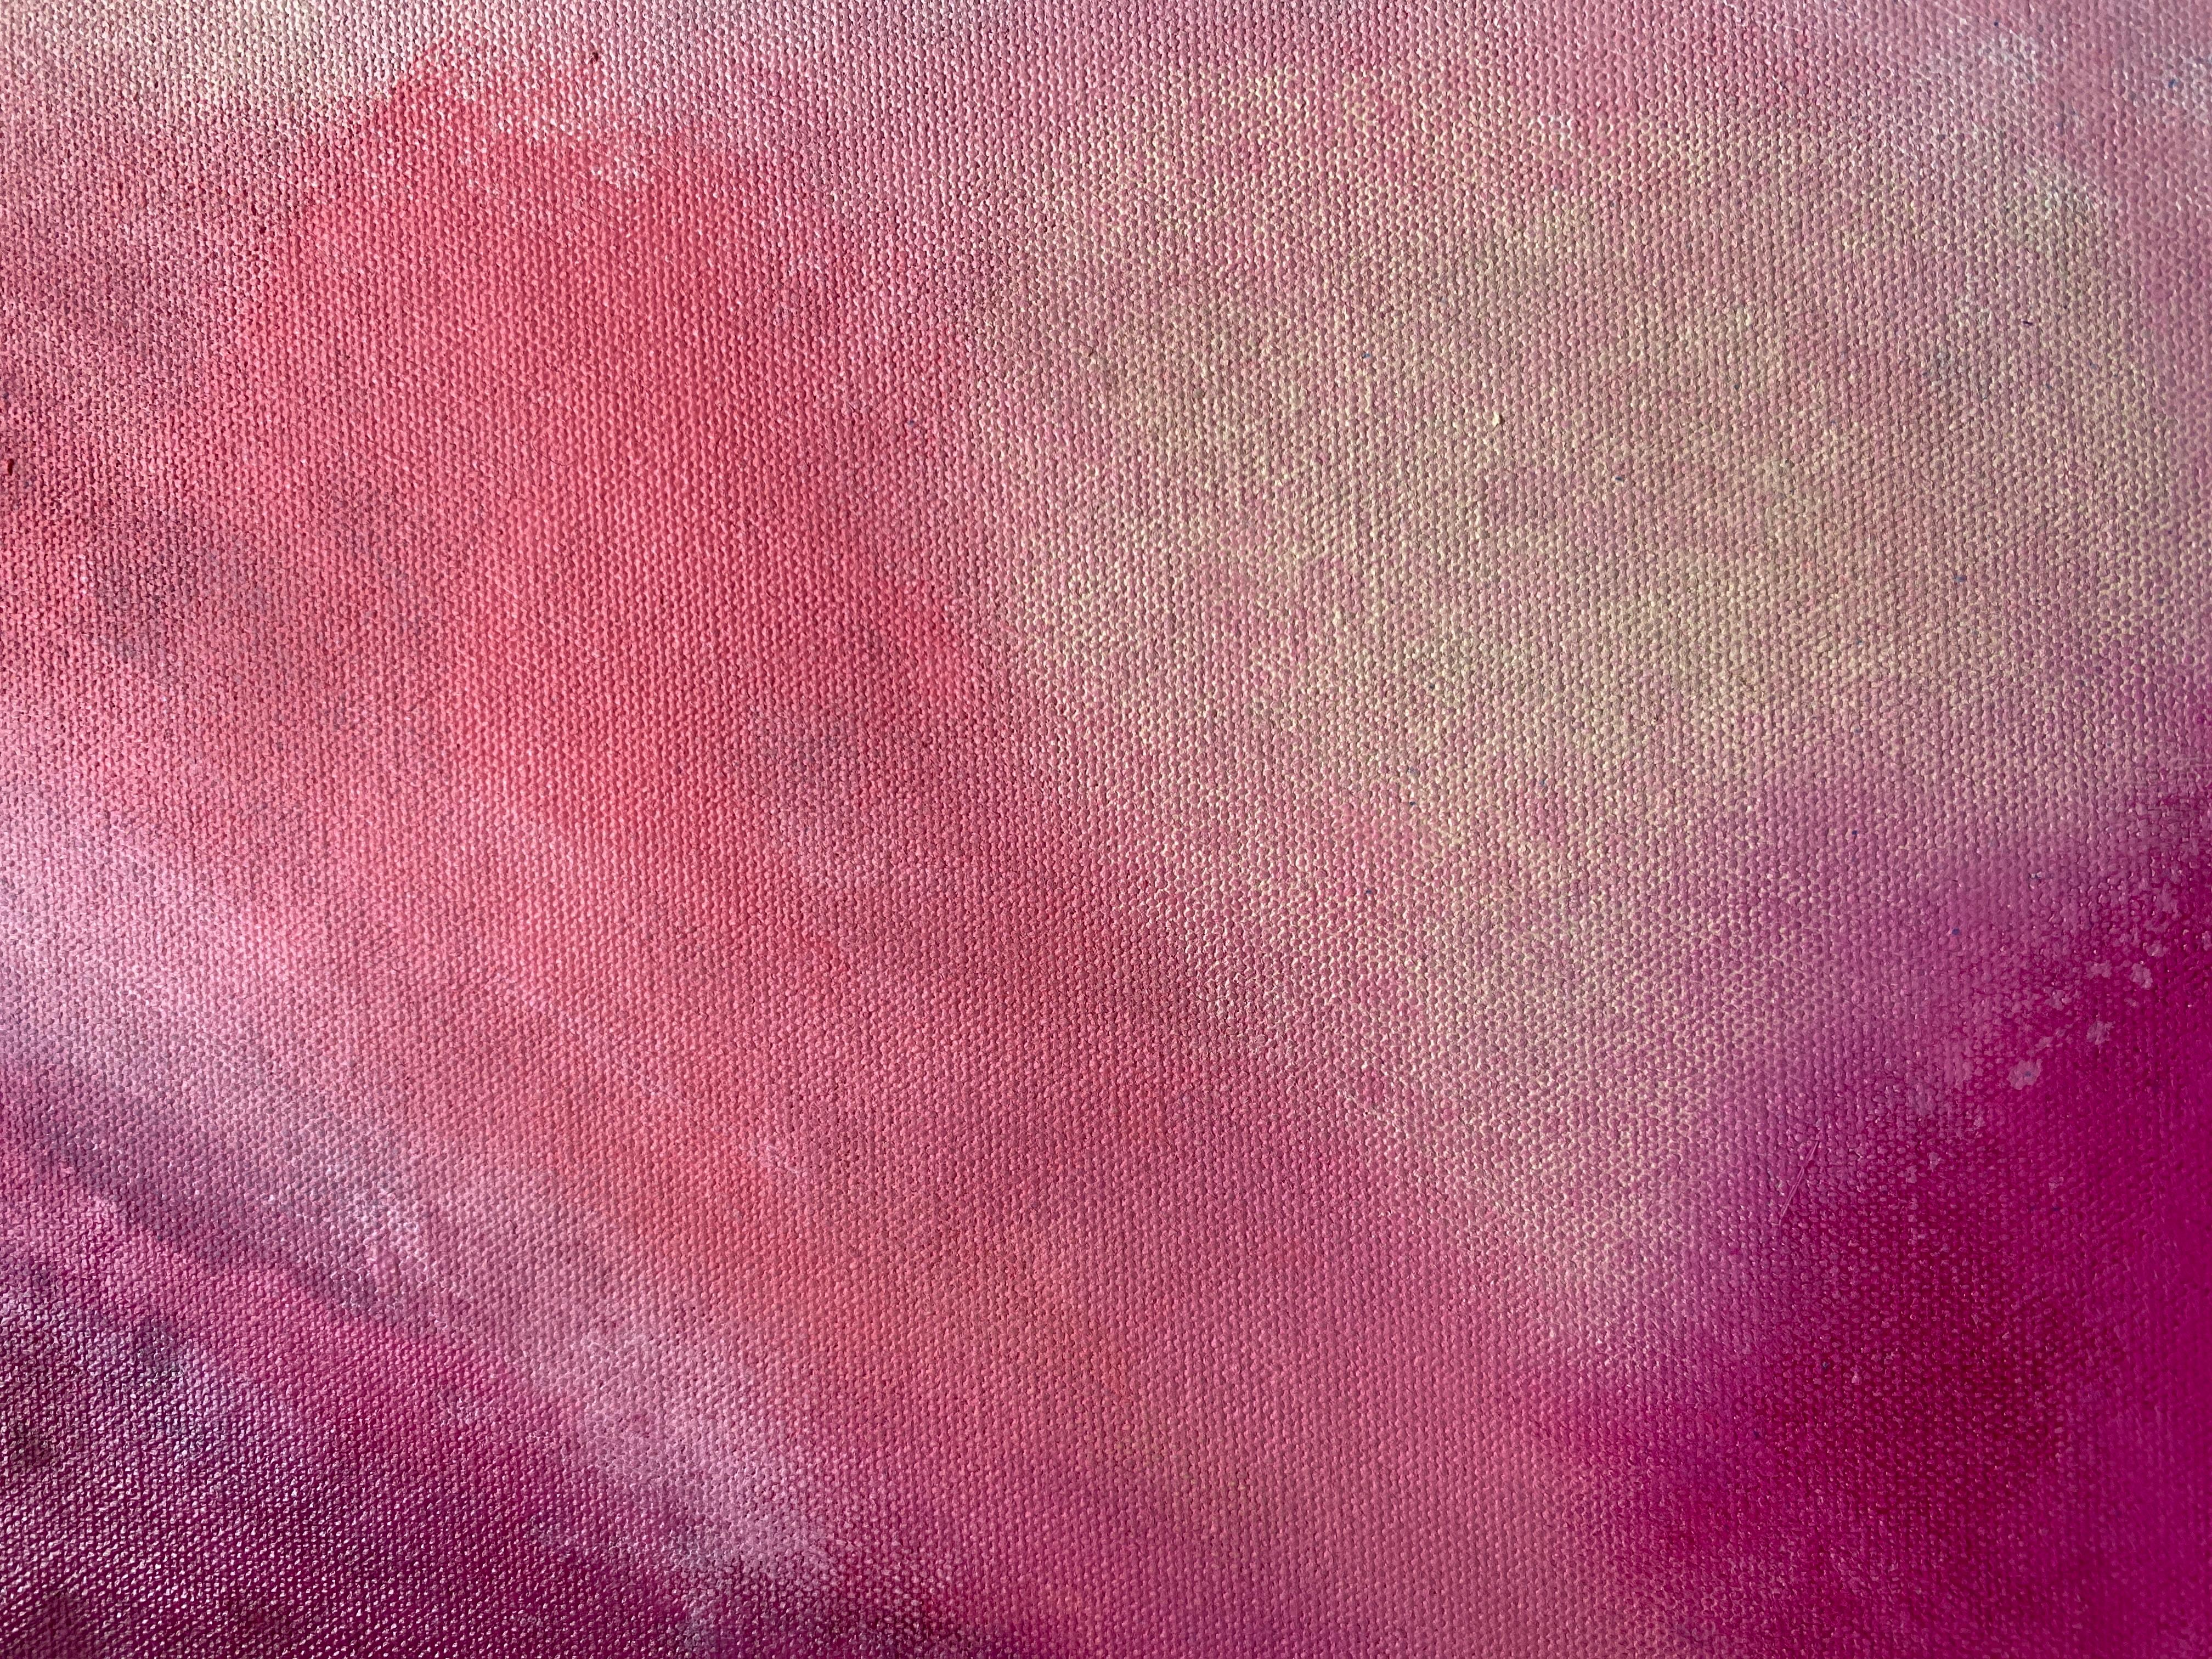 Gentle Blends Pink Peach no.1 small abstract expressionist on canvas rose red - Abstract Painting by Kathleen Rhee